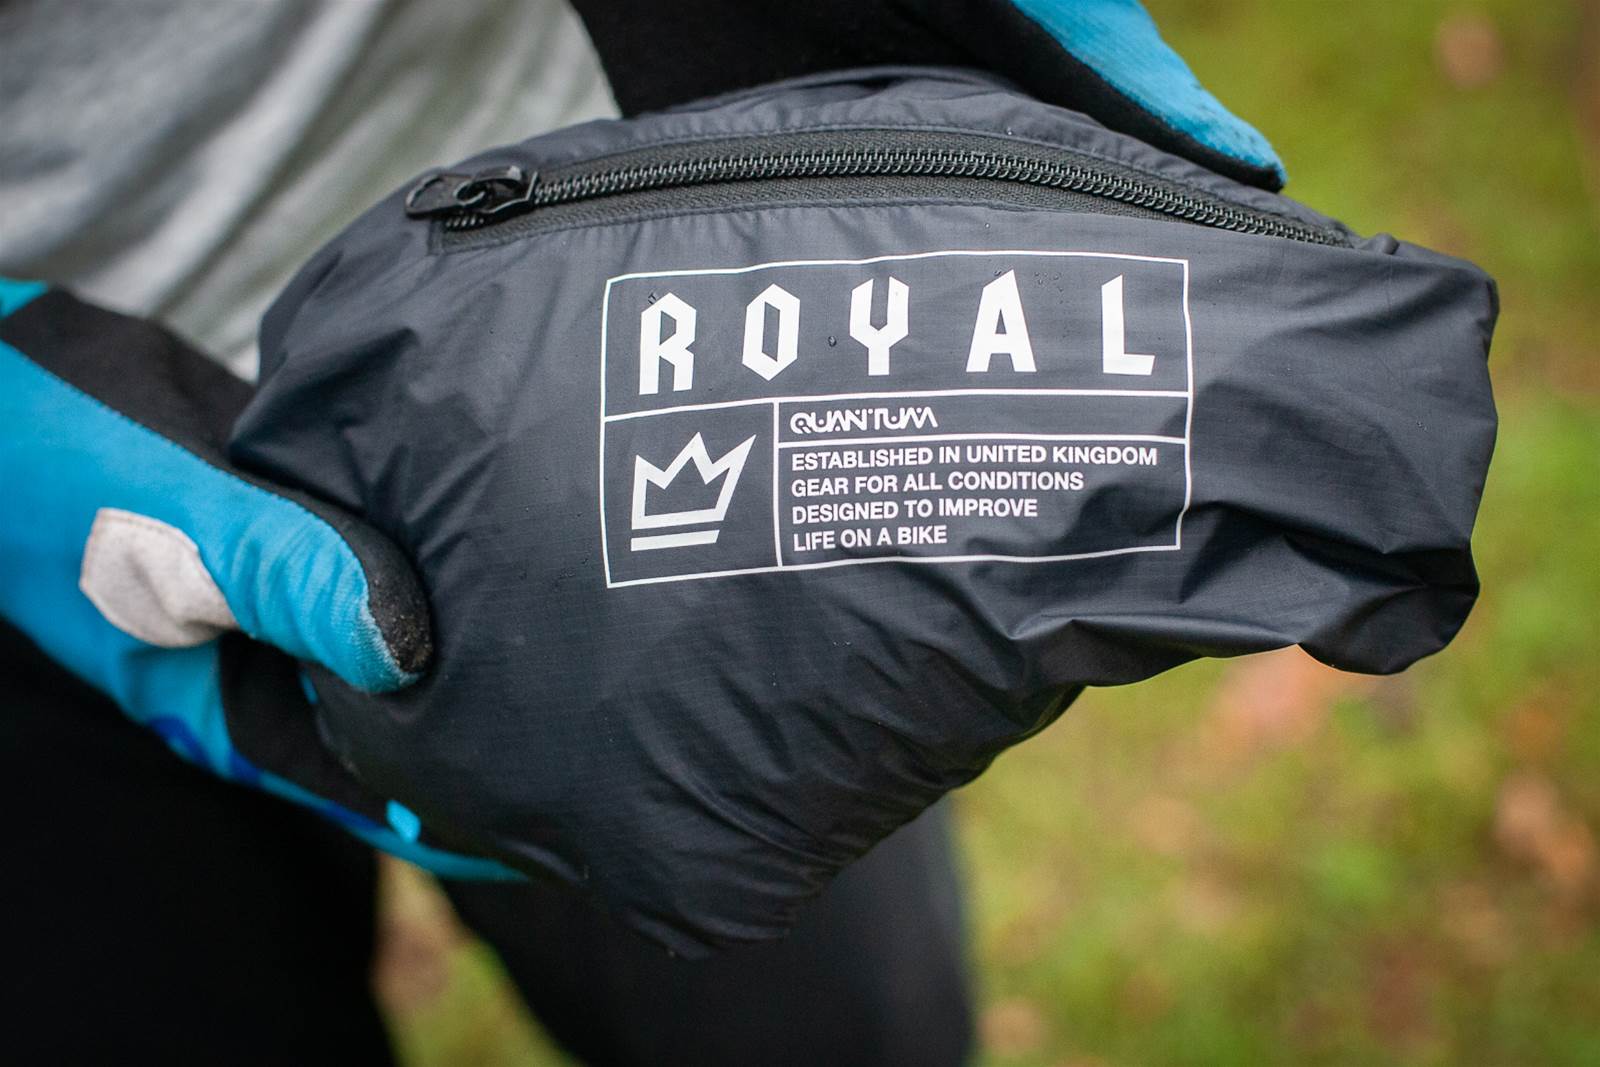 11 Waterproof Cycling Jackets To Keep You Dry